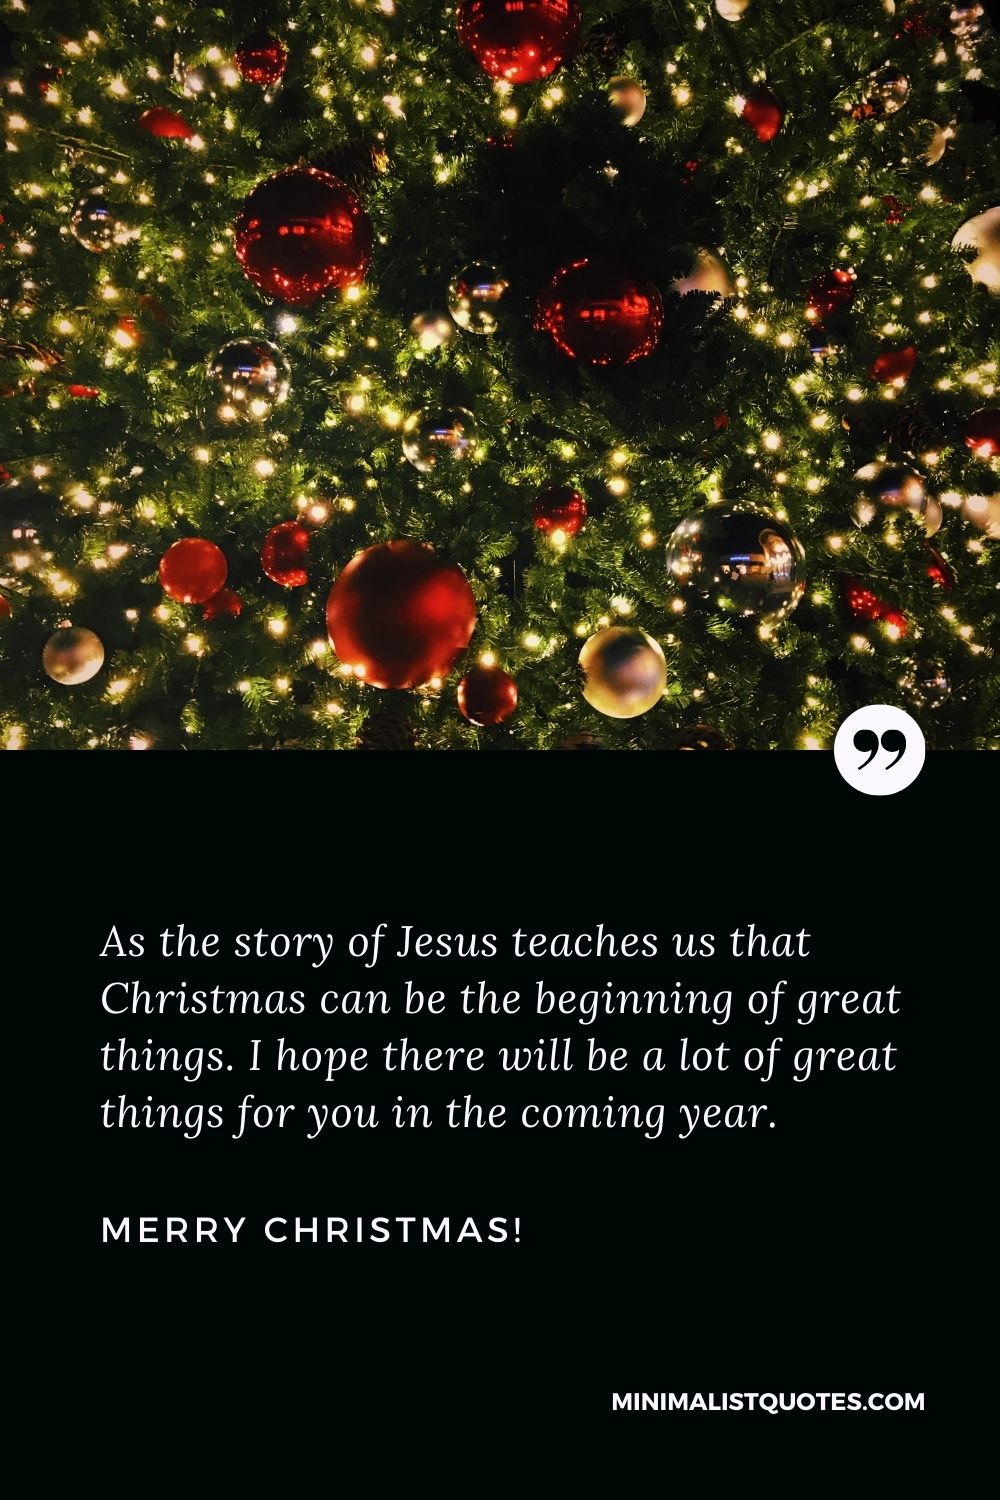 As the story of Jesus teaches us that Christmas can be the ...